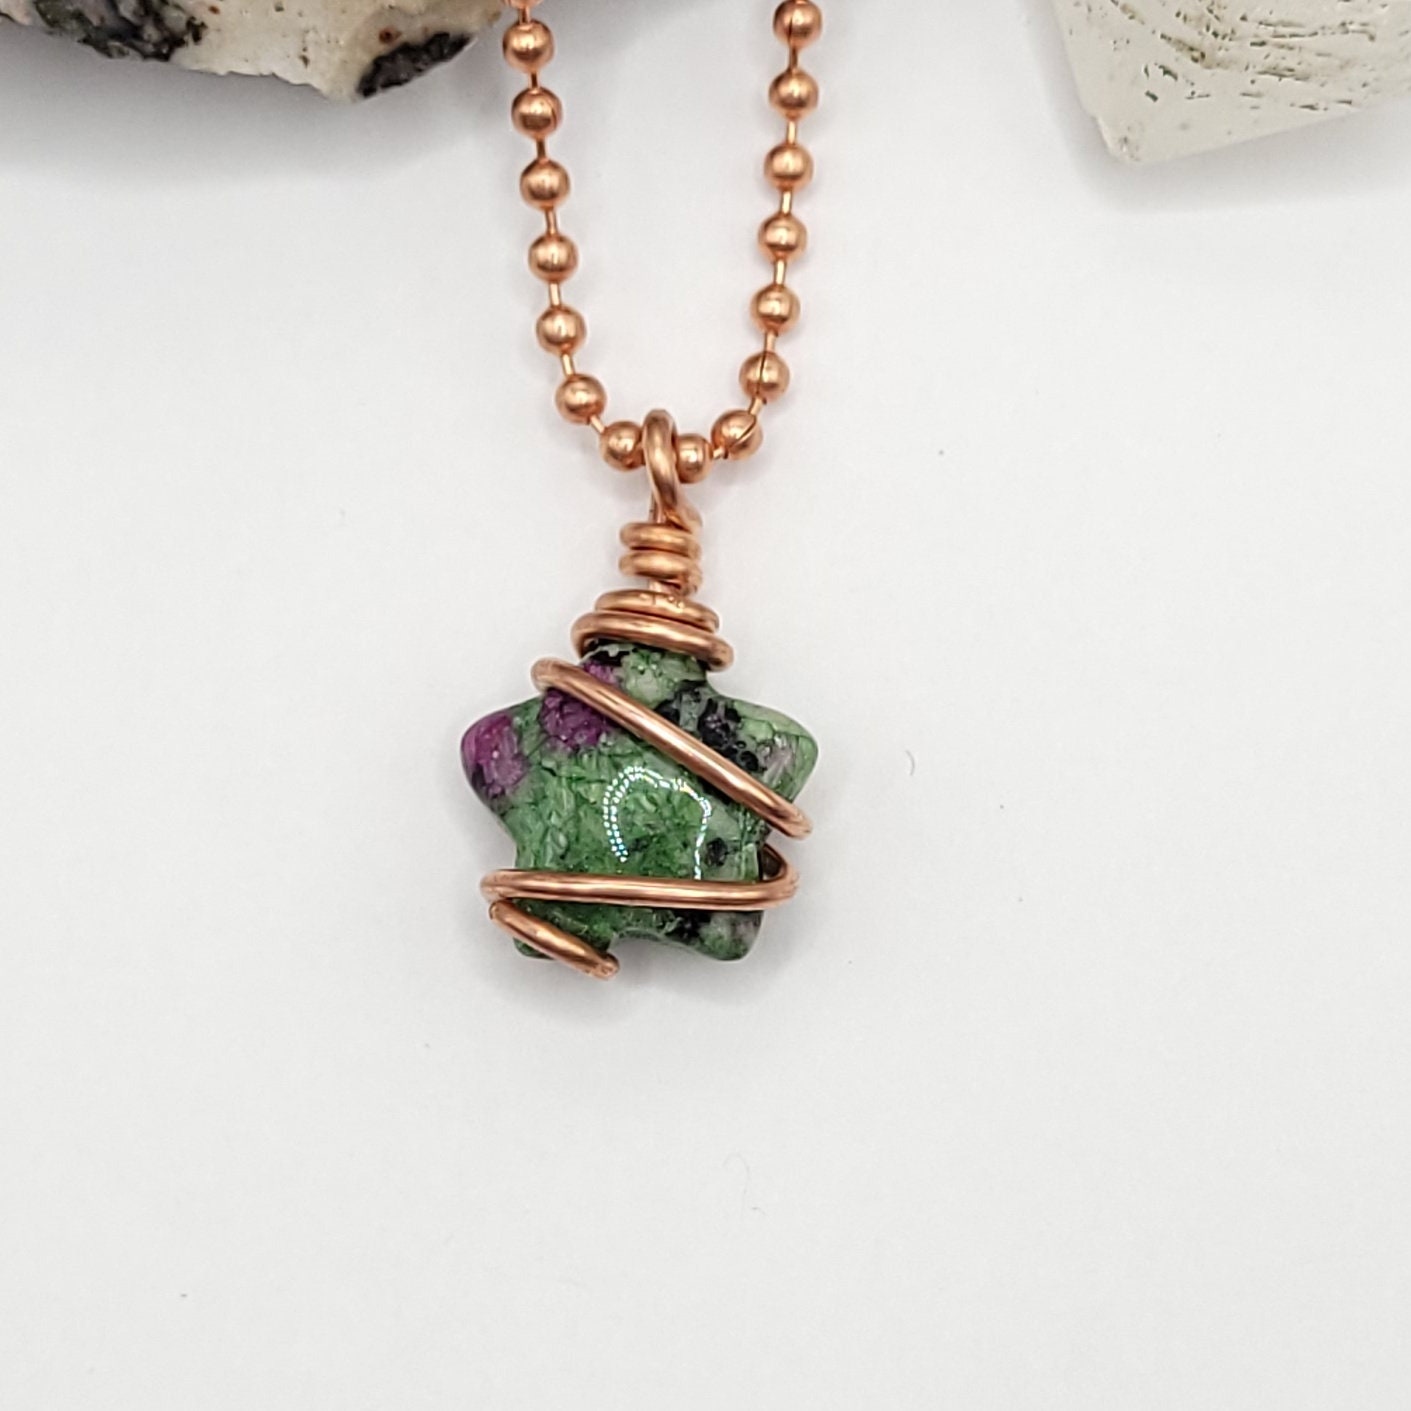 Ruby in Zoisite Star Necklace, Wire Wrapped Ruby in Zoisite Star Pendant | Promotes Happiness, Abundance and Growth